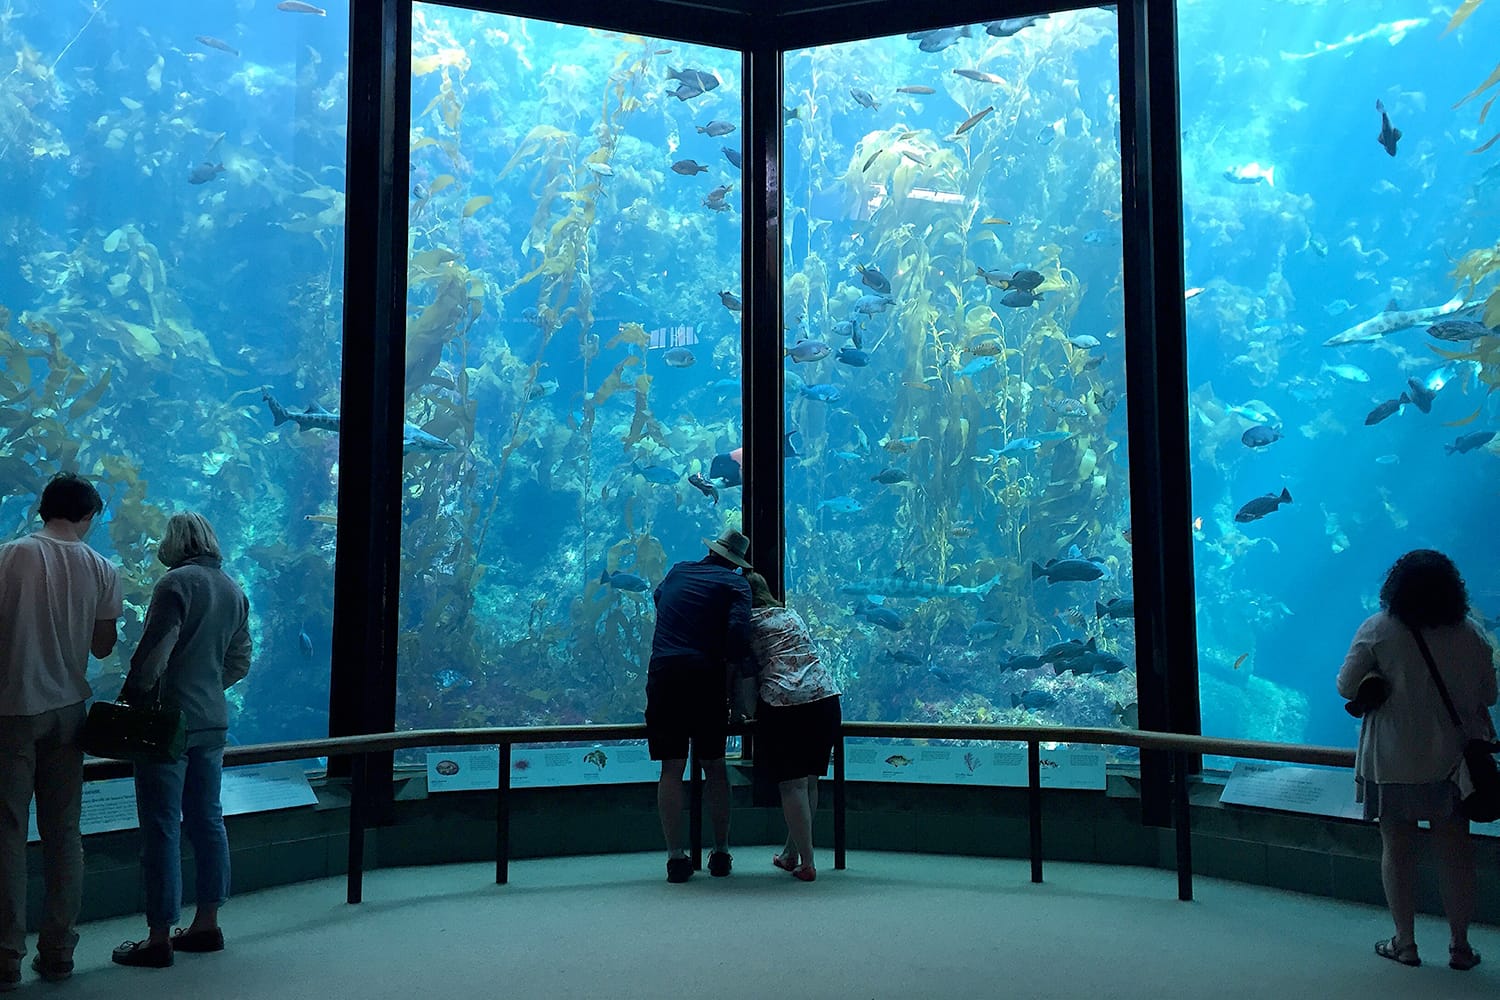 Visitors view fish in the Kelp Forest tank at The Monterey Bay Aquarium in Monterey, California, USA.